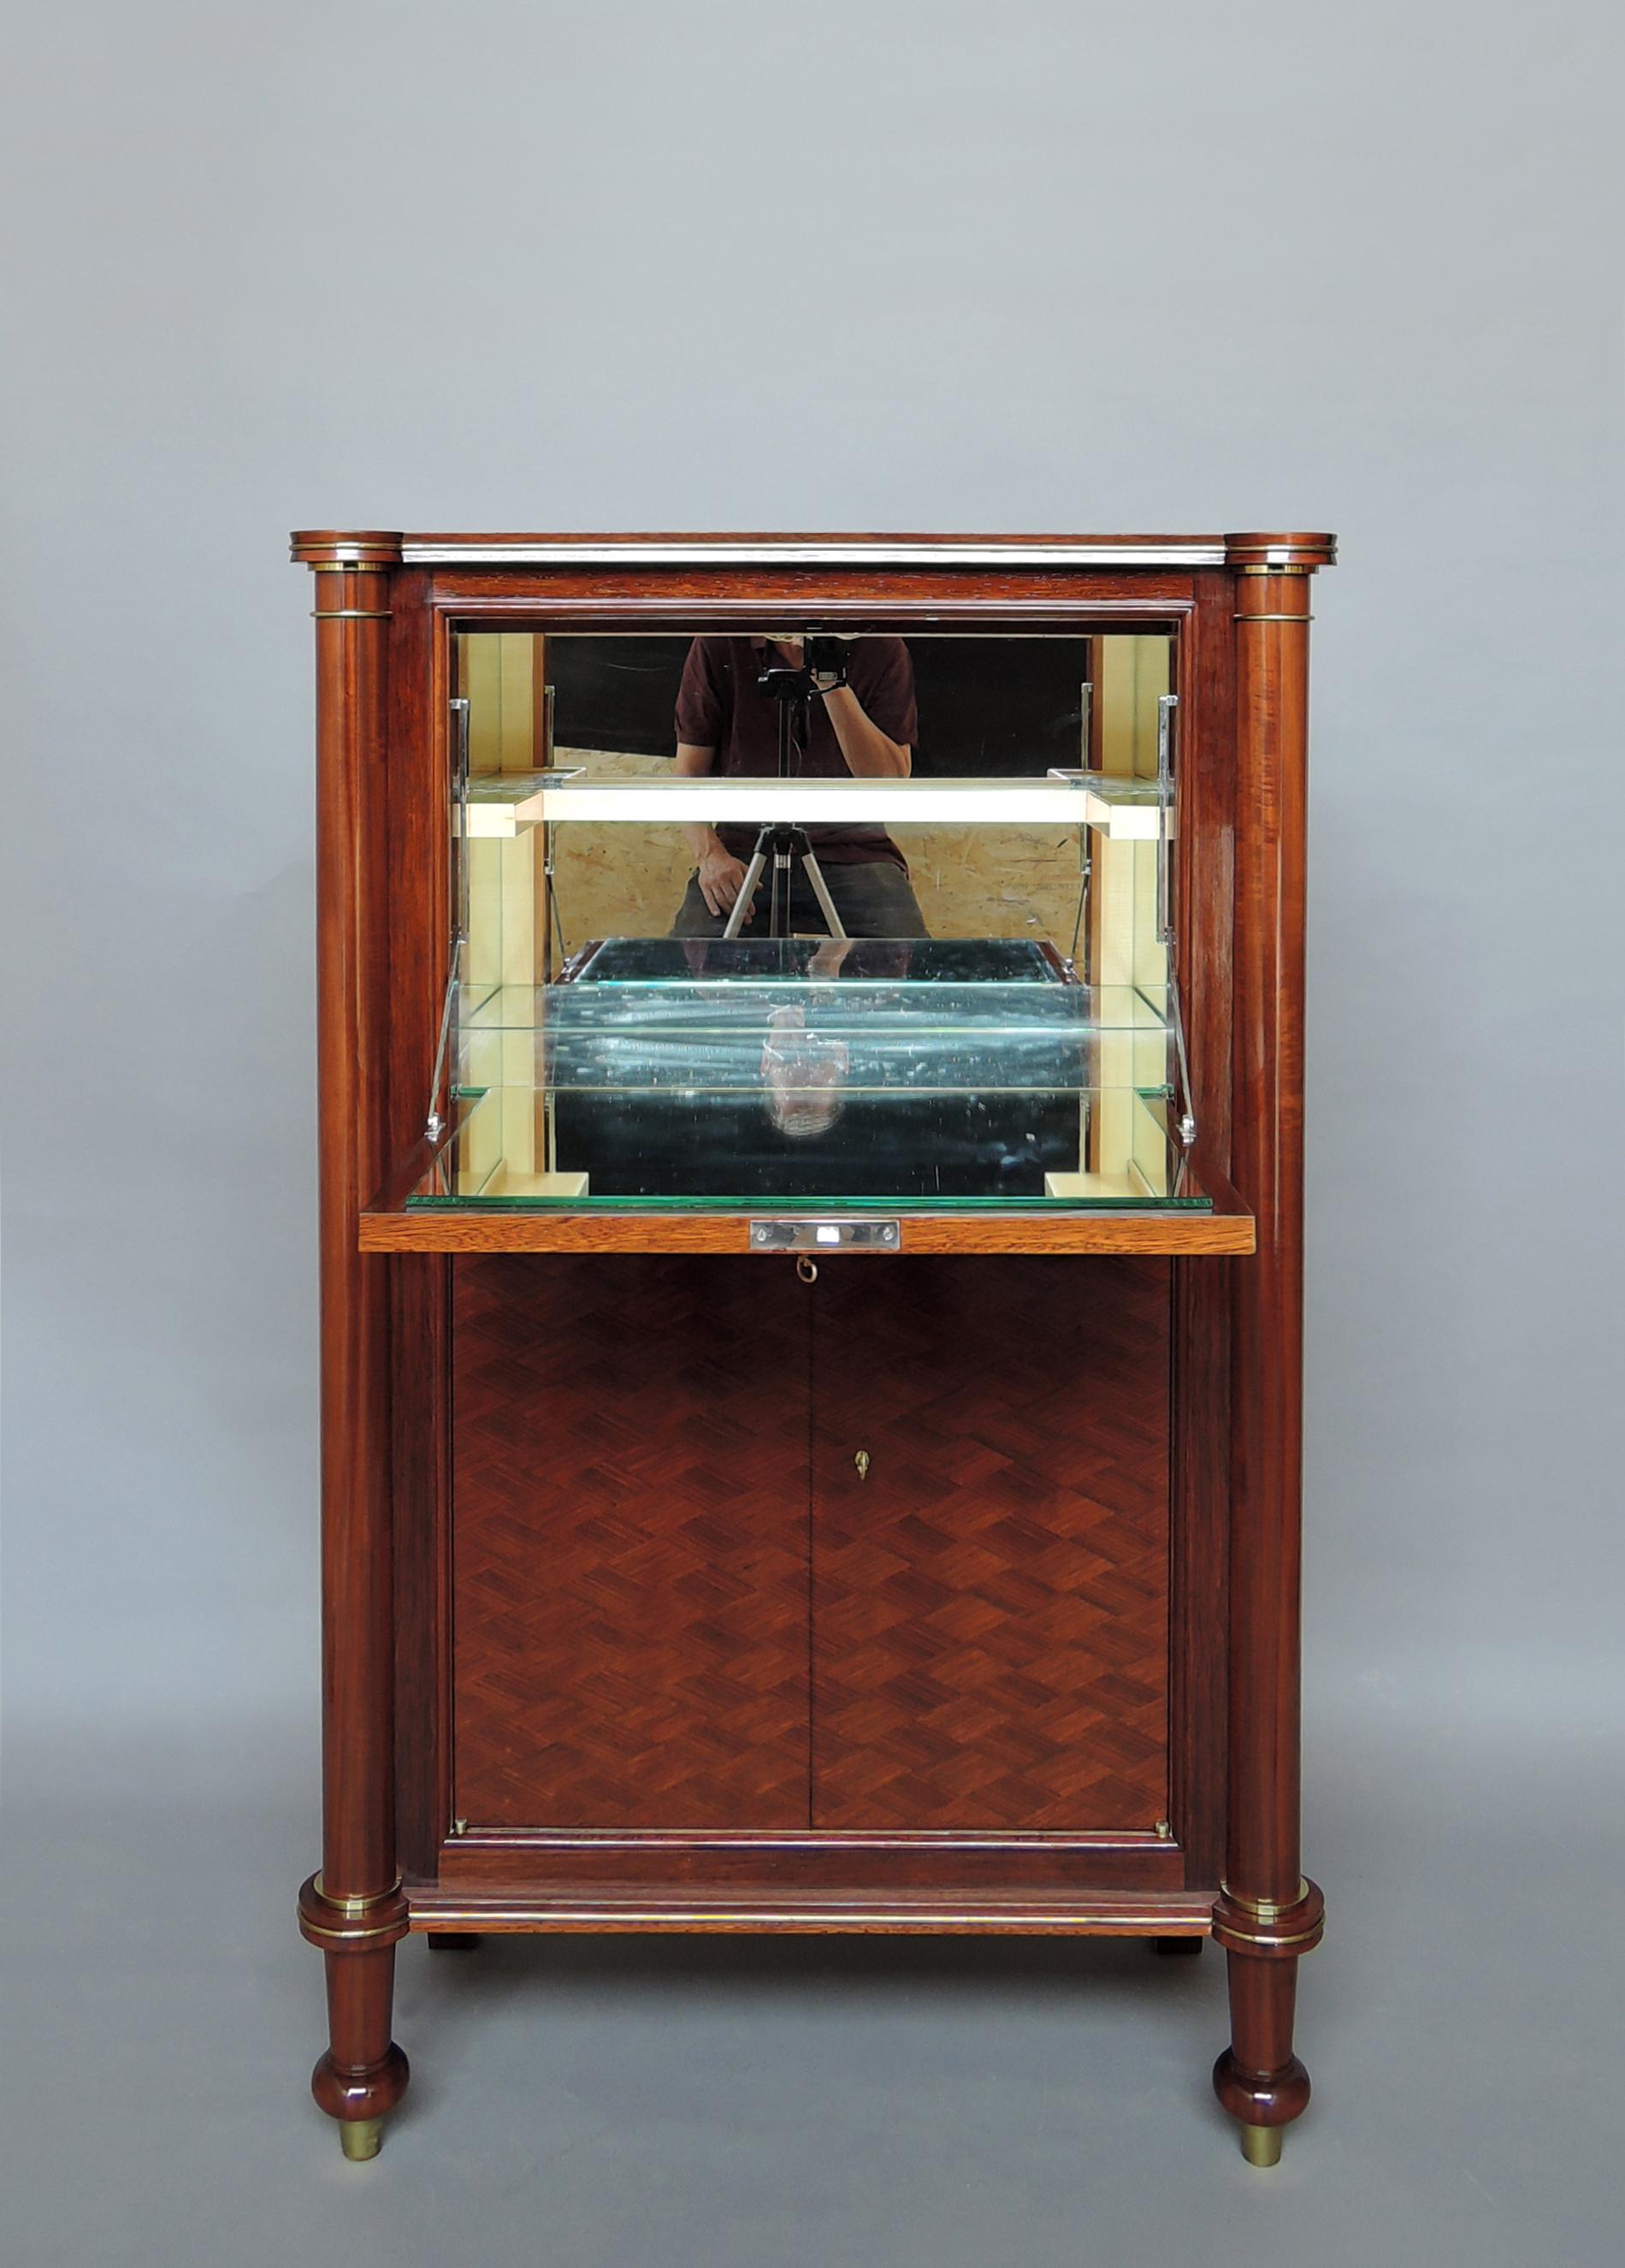 Jules Leleu (1883 - 1961) : A fine French Art Deco bar cabinet with palisander and metal marquetry, and brass mounted details. Interiors in sycamore, mirror and chrome.
Inlaid plaque signed J Leleu